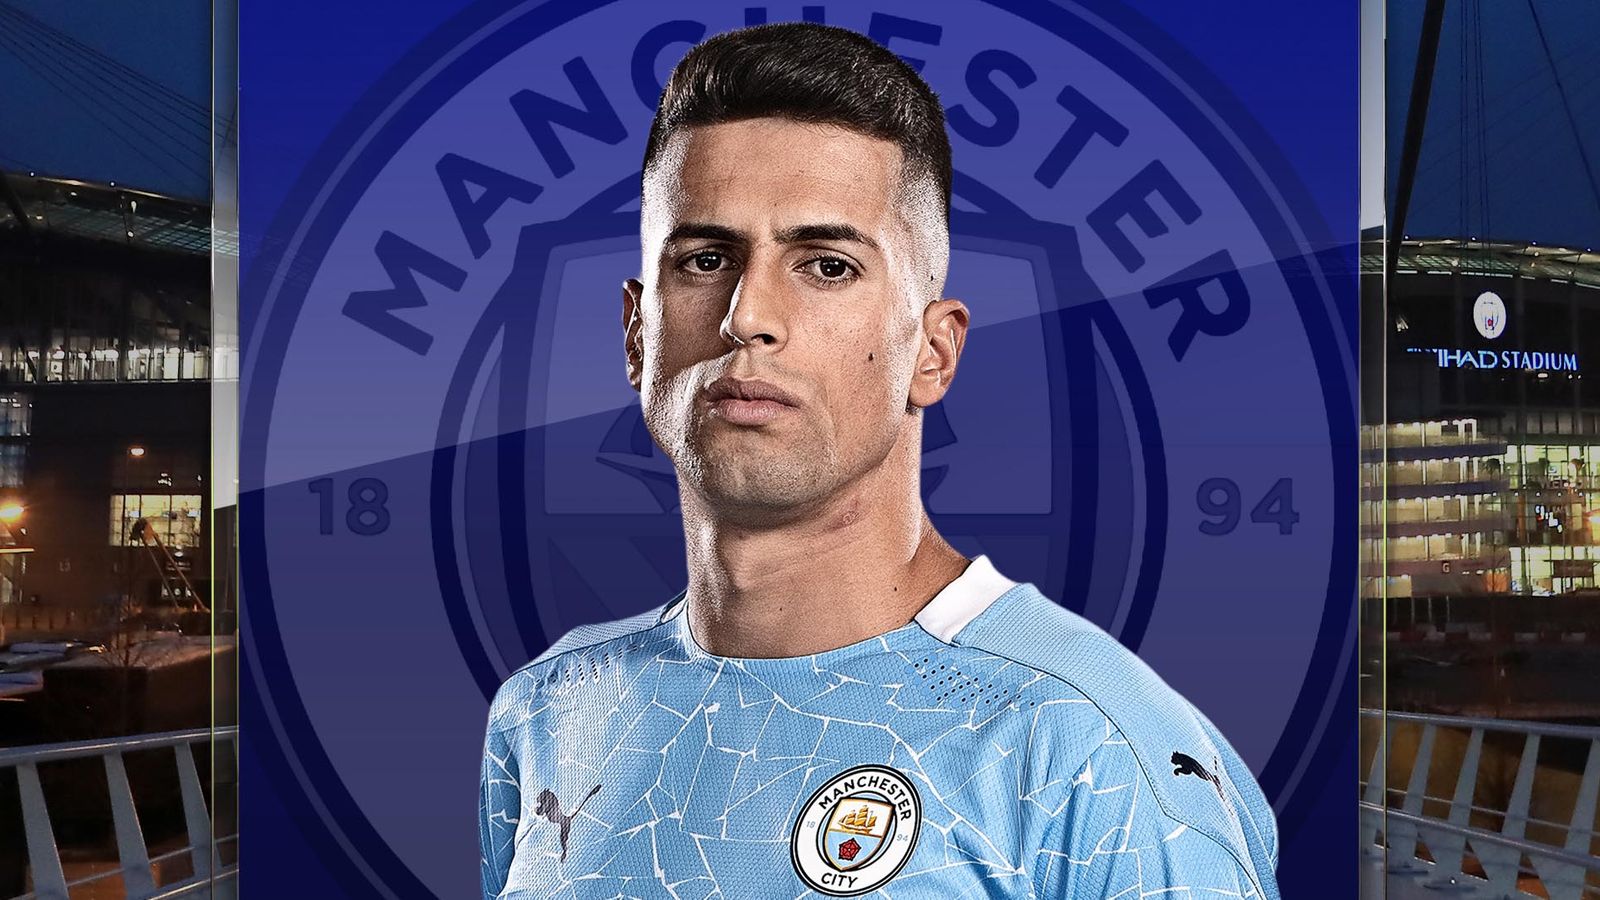 Joao Cancelo S Unique Role At Man City Explained By Pep Guardiola